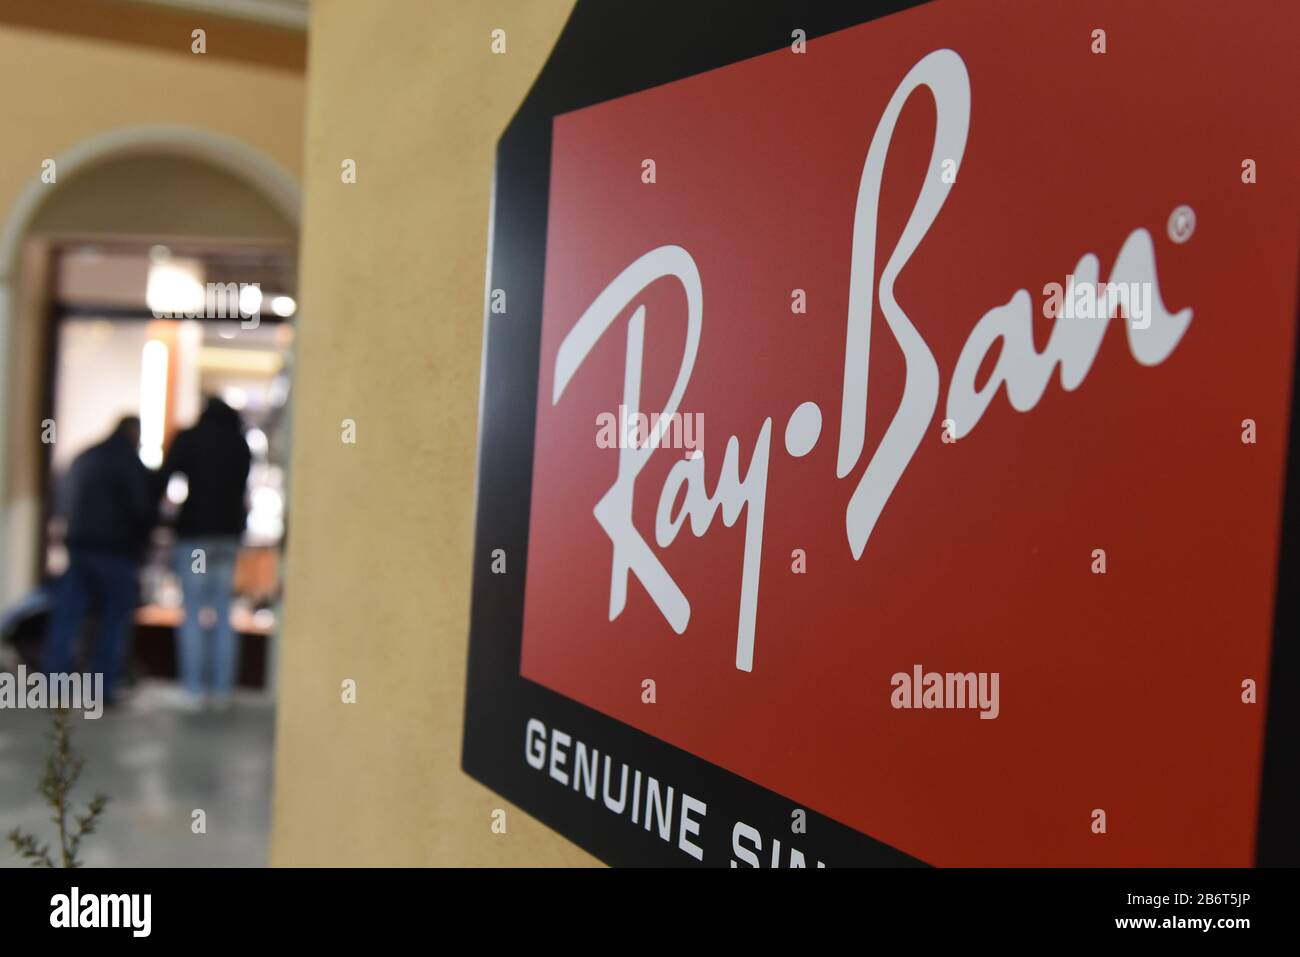 Ray ban logo hi-res stock photography and images - Alamy